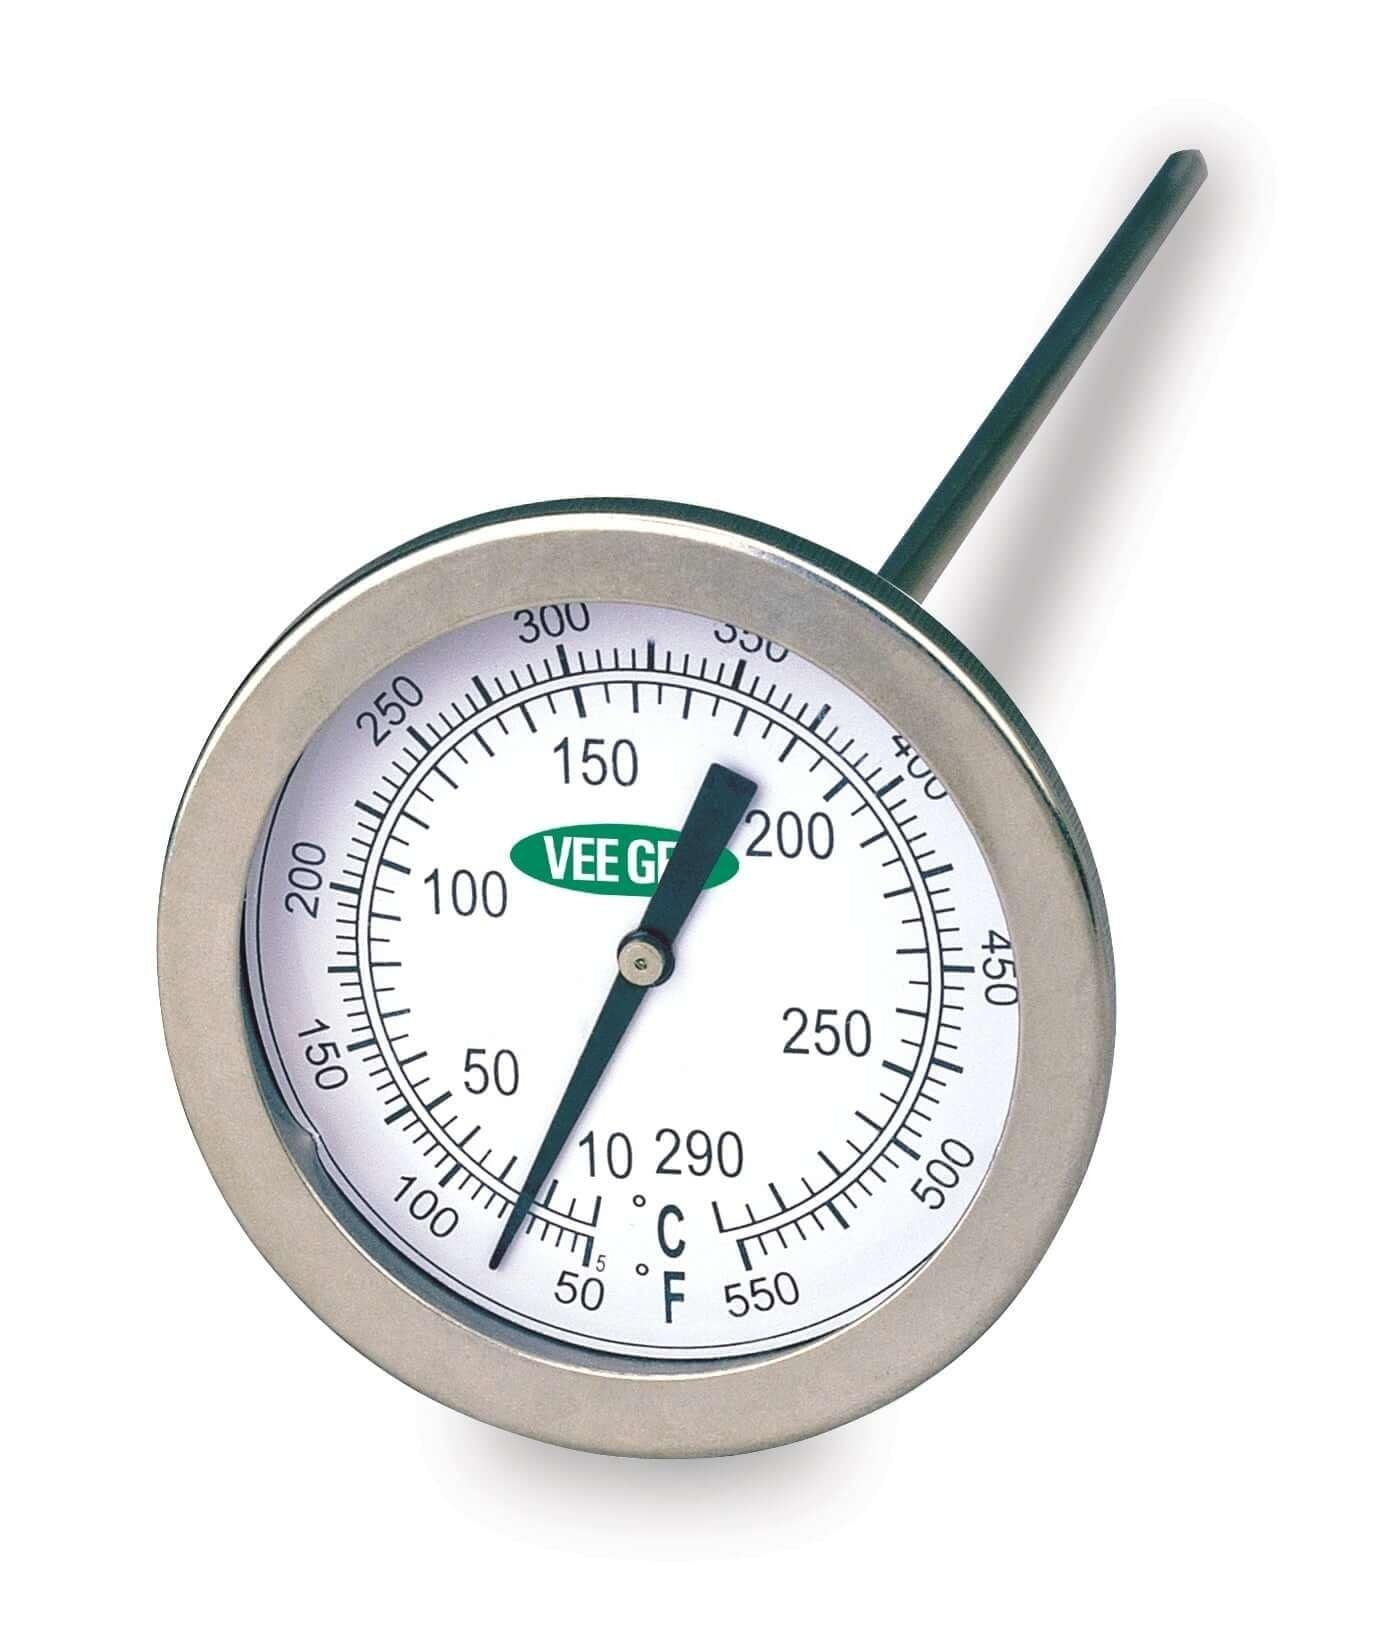 Vee Gee 82550DG Scientific Thermometer with Dial, 50 to 550°F/10 to 290°C, 8 Stem